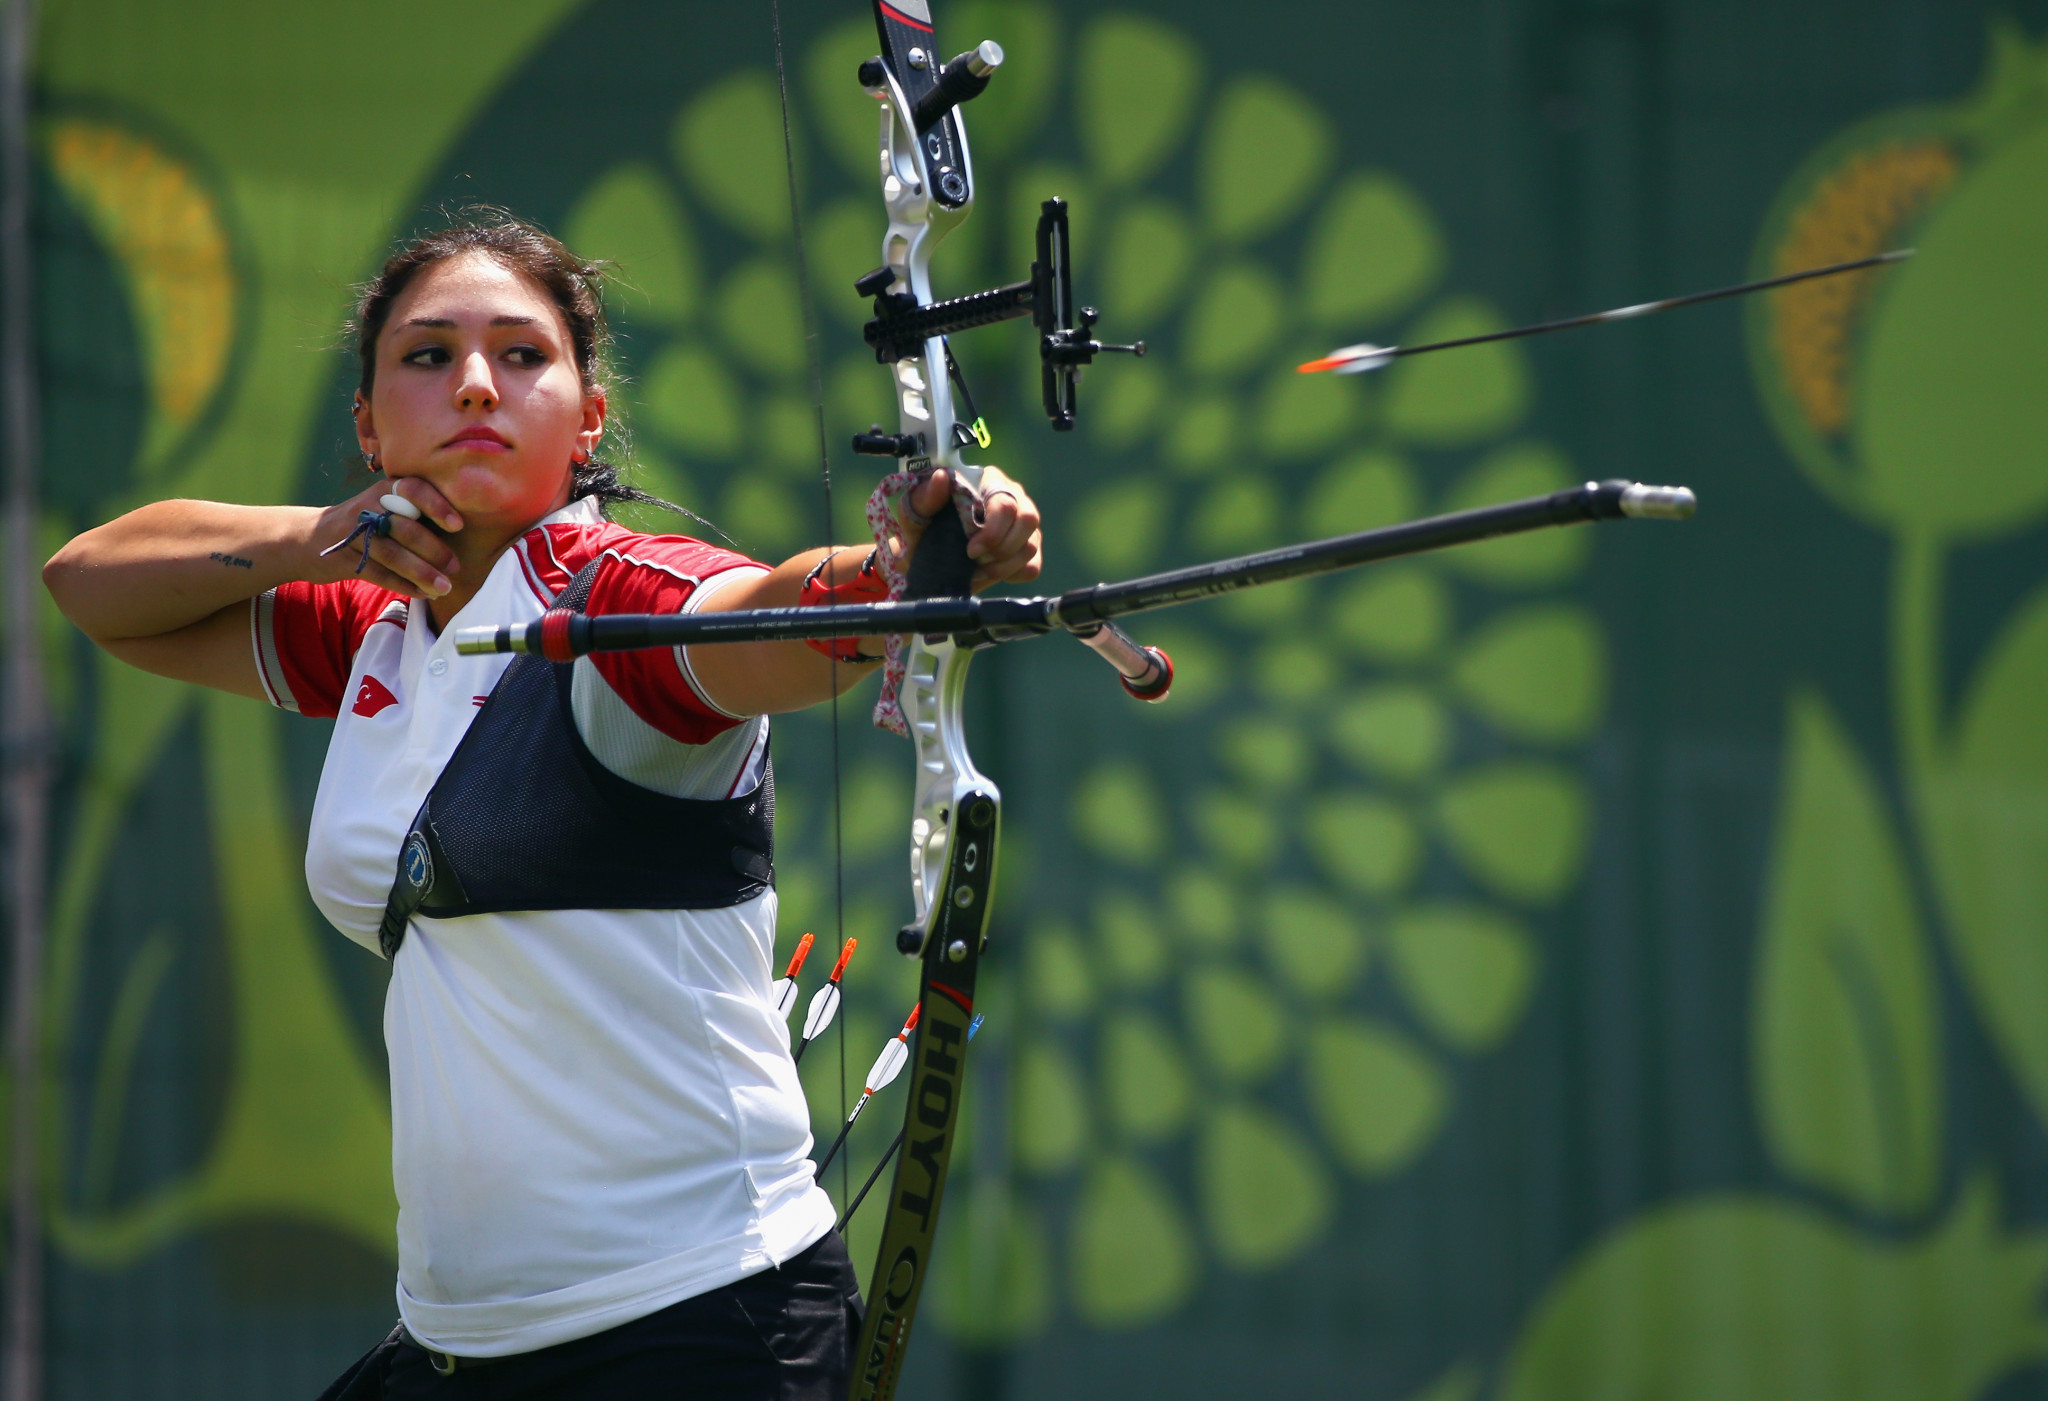 Turkey's Yasemin Anagoz ousted 2013 world champion Maja Jager of Denmark to clinch the women's recurve gold medal ©Getty Images